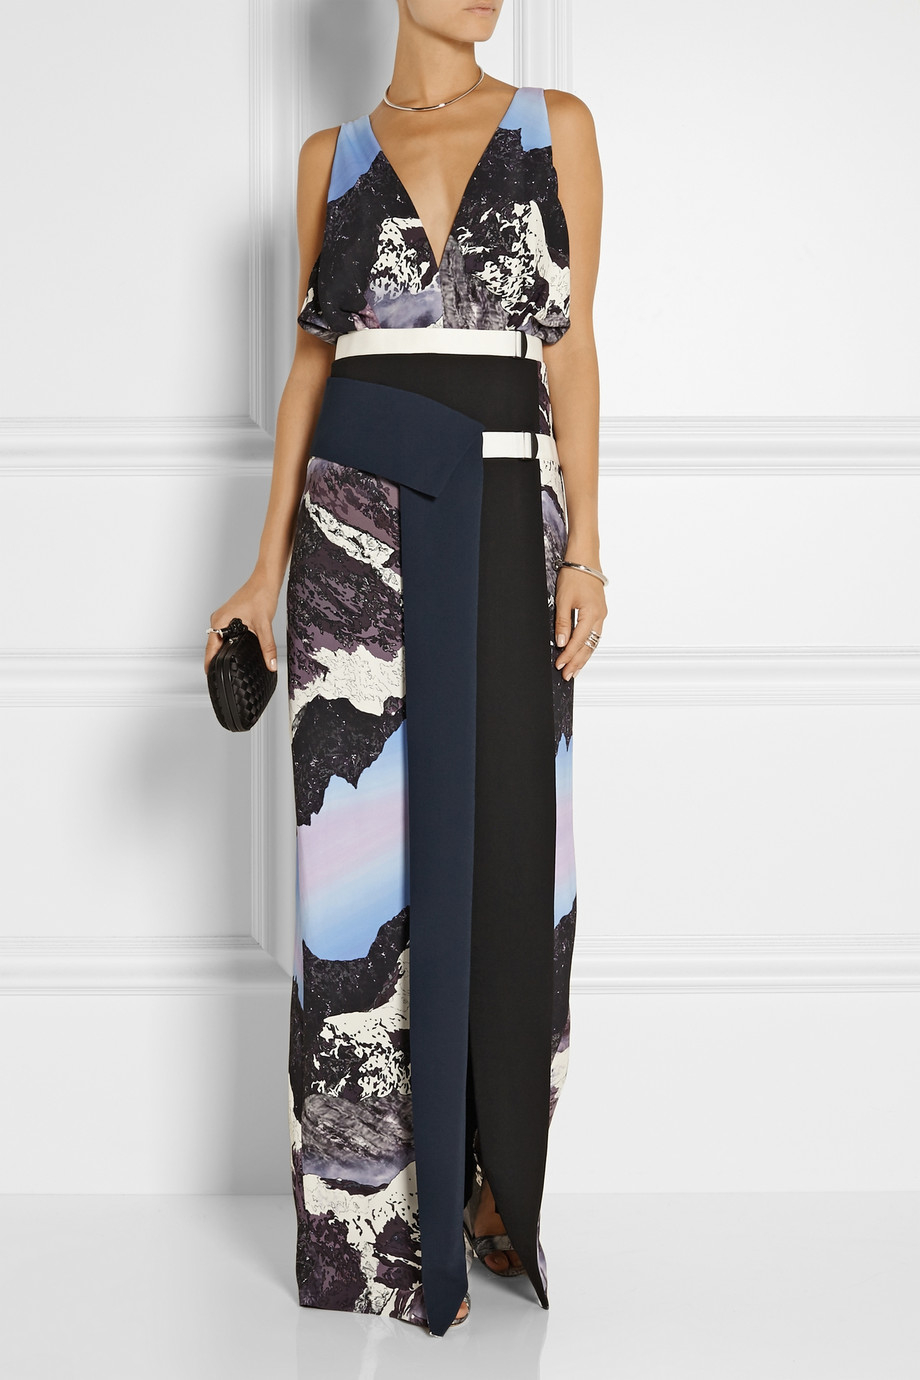 Lyst - Peter Pilotto Nika Printed Stretch-Crepe Gown in Blue